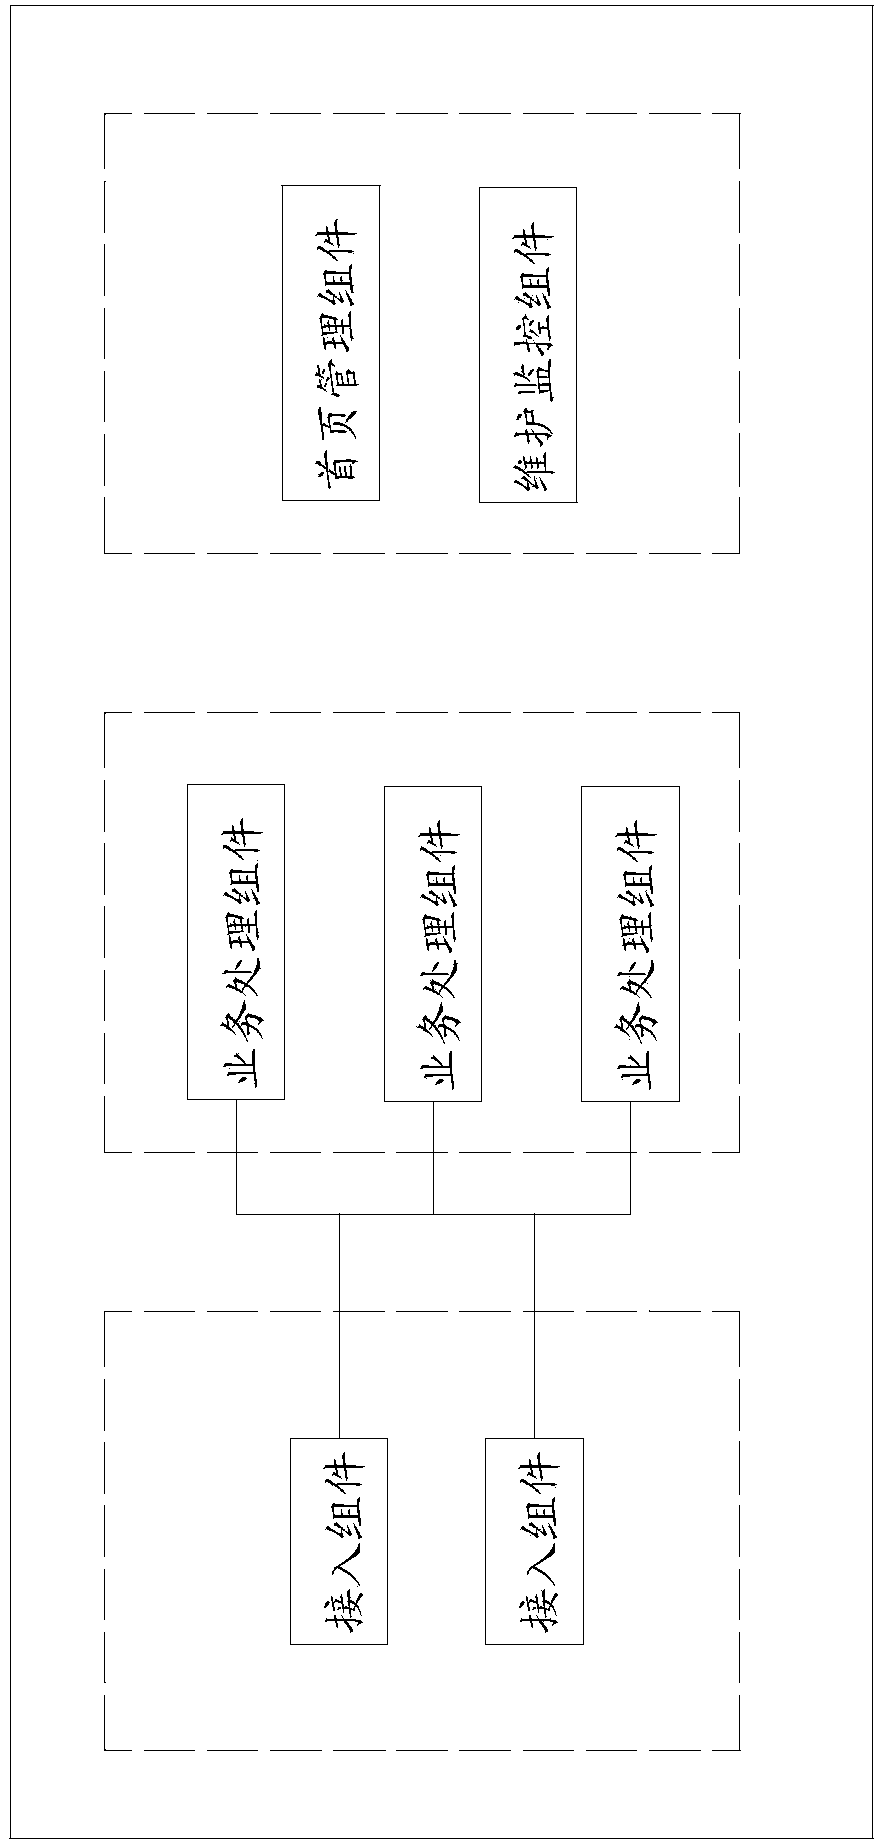 Method for providing large concurrent processing and flow control for mobile phone client sides